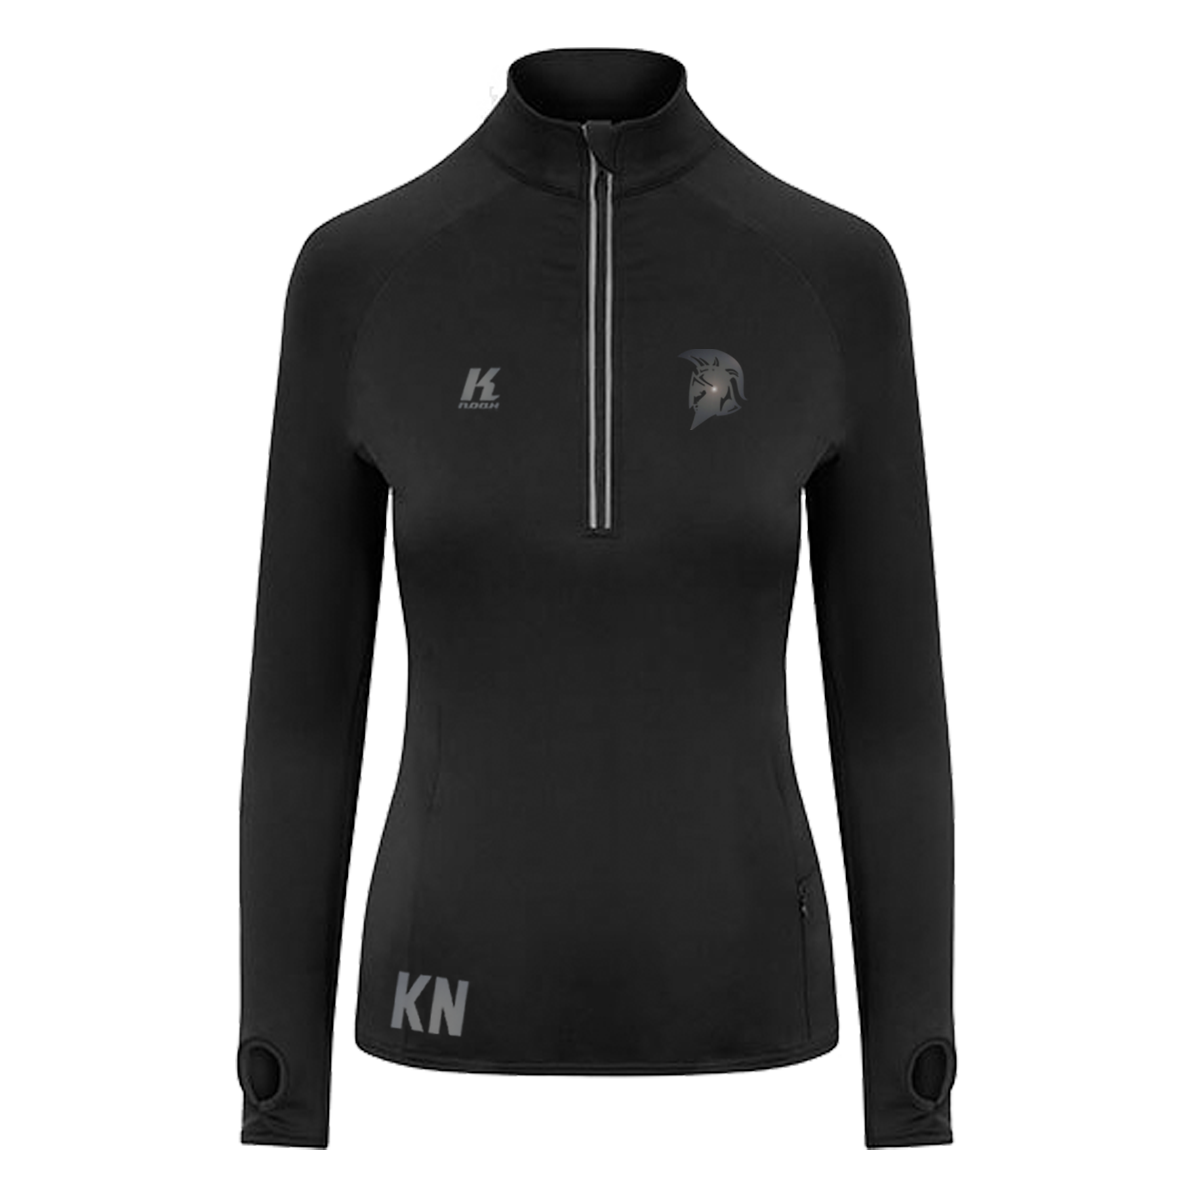 Spartans "Blackline" Womens Cool Flex 1/2 Zip Top with Initials/Playernumber